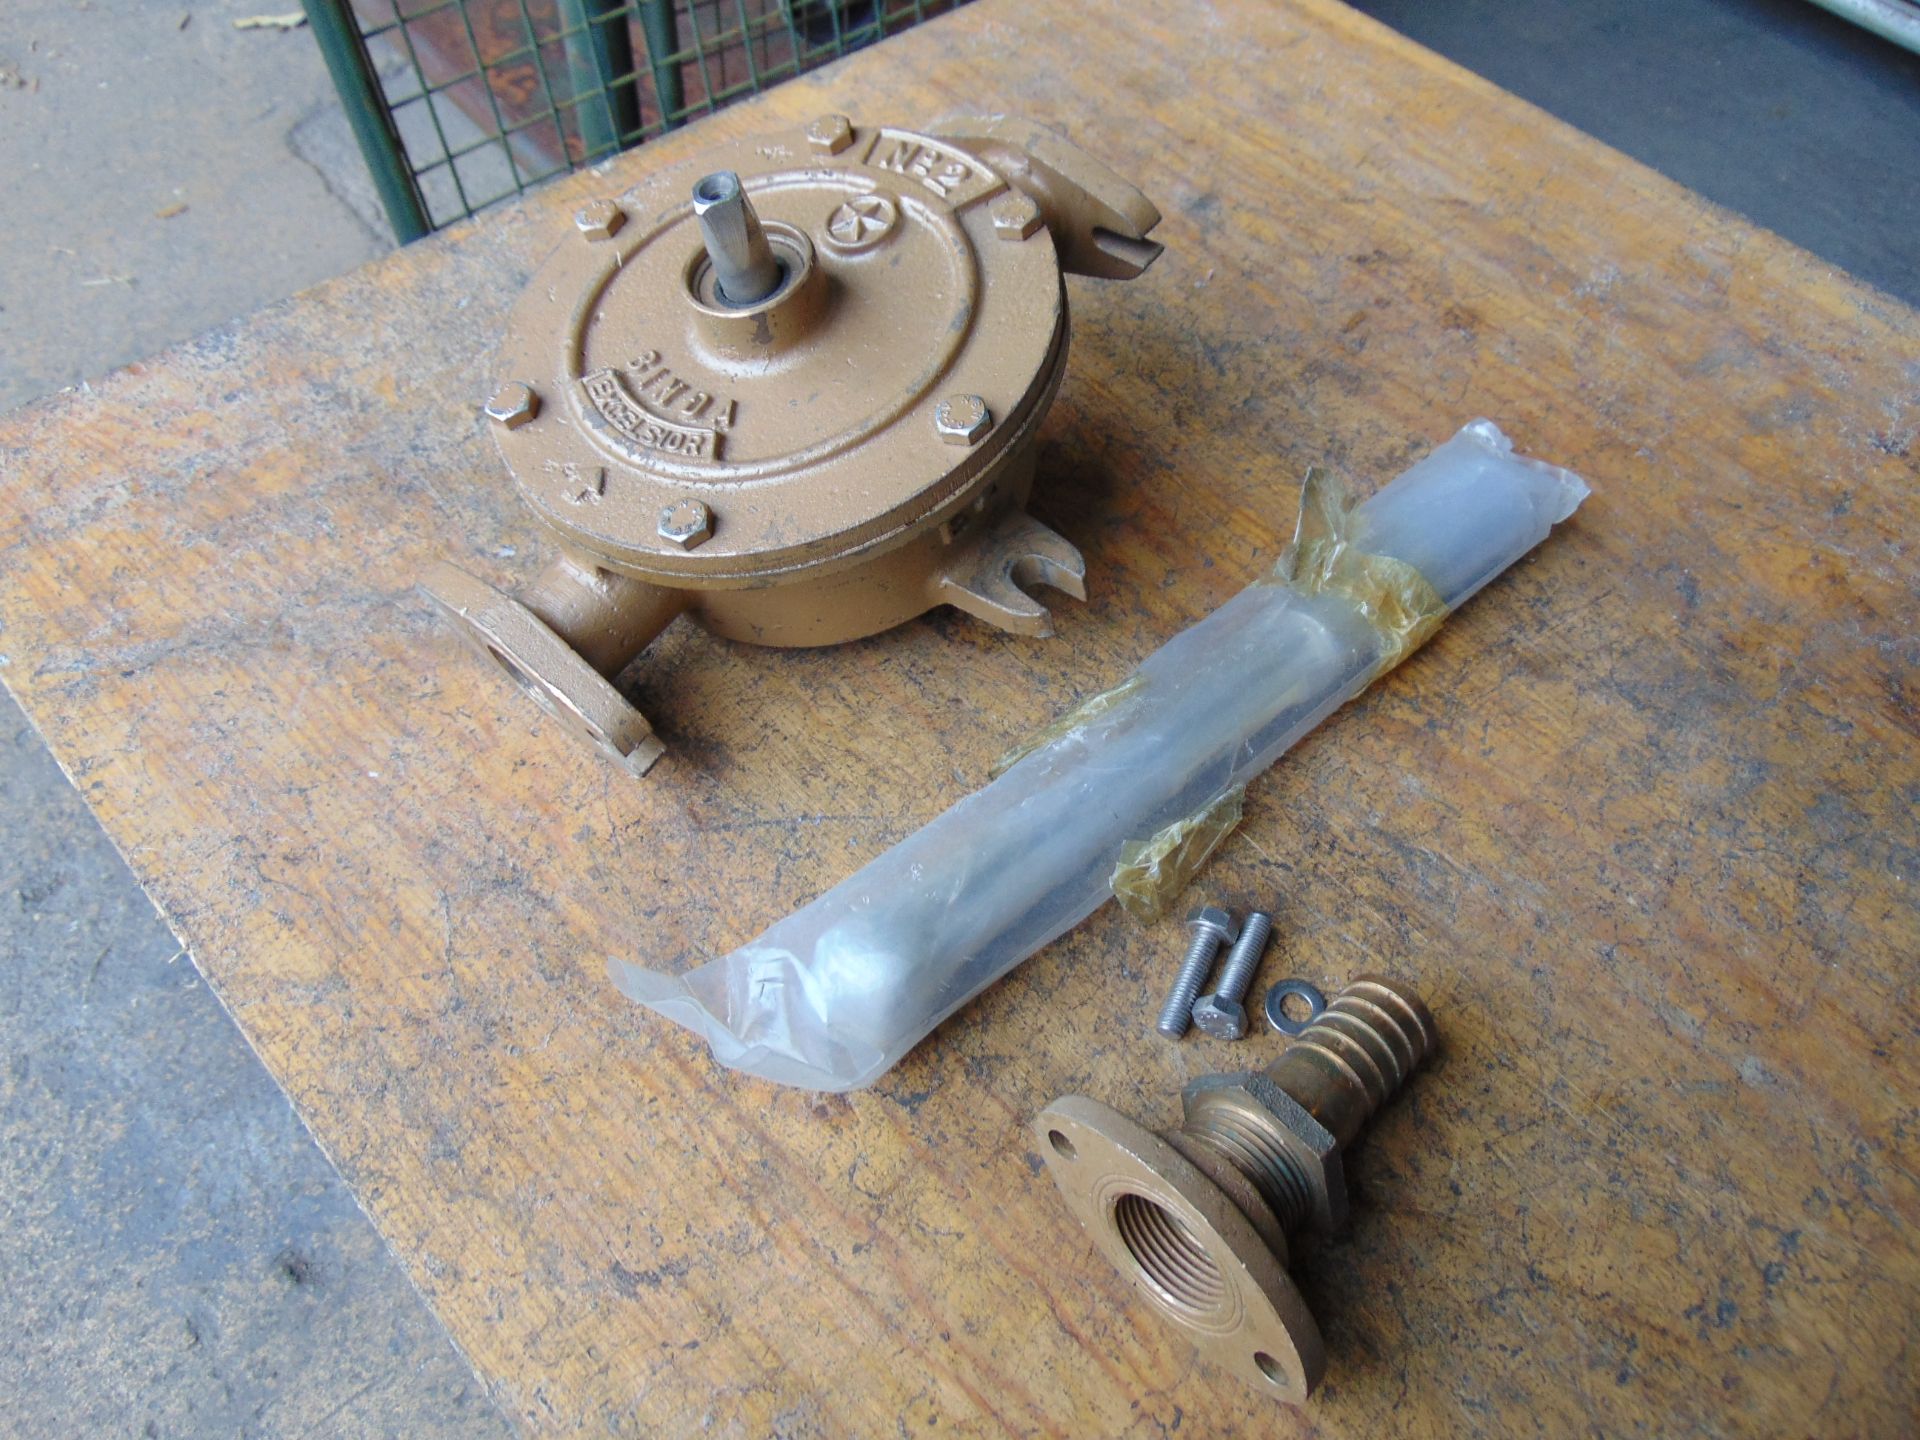 New Unissued Rotary Water Pump and Fittings c/w Handle - Image 2 of 4